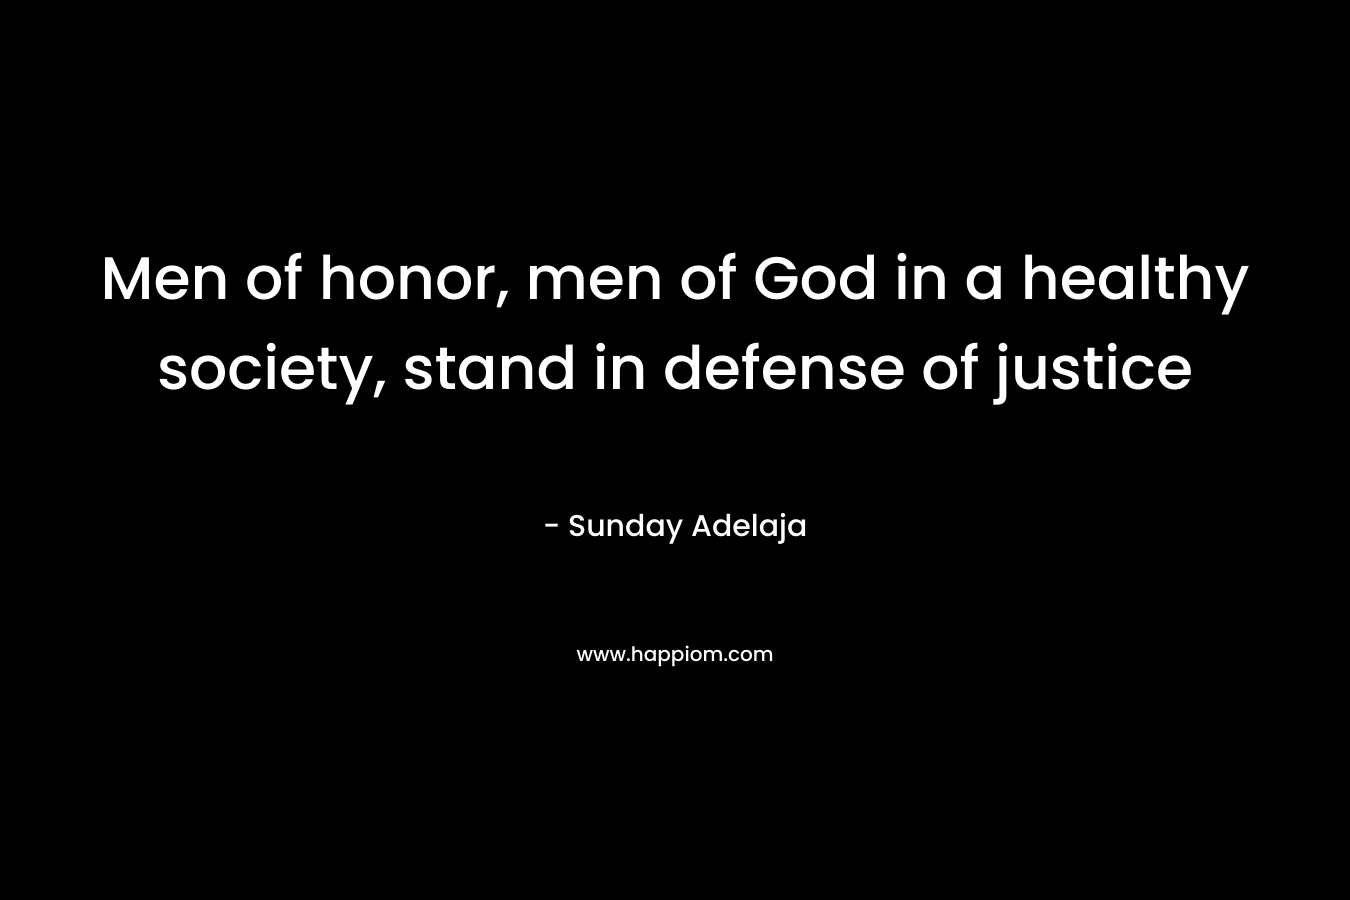 Men of honor, men of God in a healthy society, stand in defense of justice